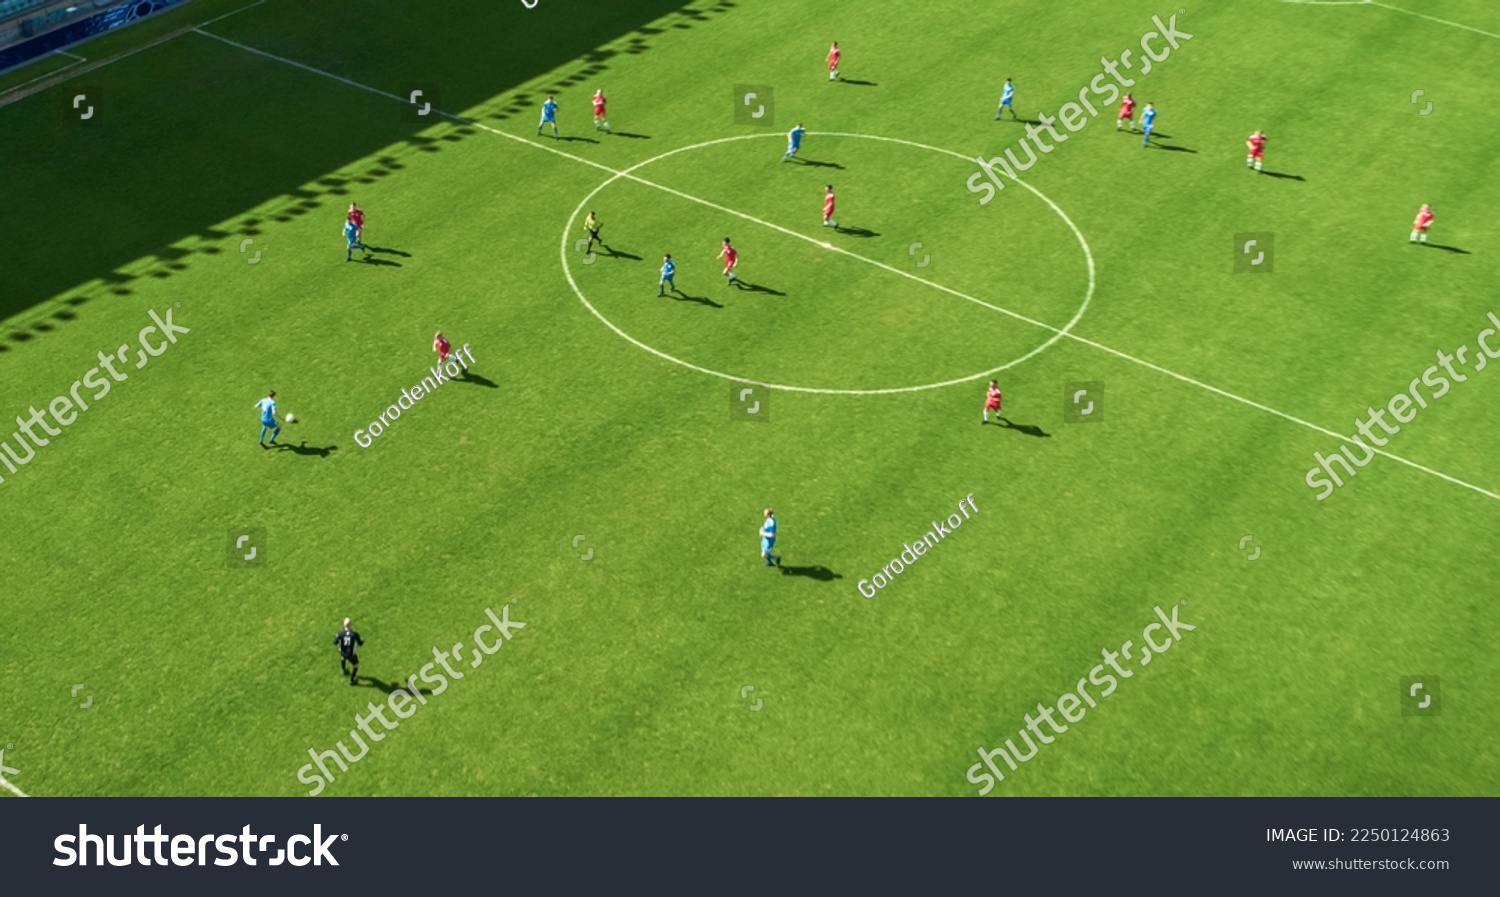 Aerial Top Down View of Soccer Football Field and Two Professional Teams Playing. Passing, Dribbling, Attacking. Football Tournament Match, International Competition. Flyover Whole Stadium Shot. #2250124863